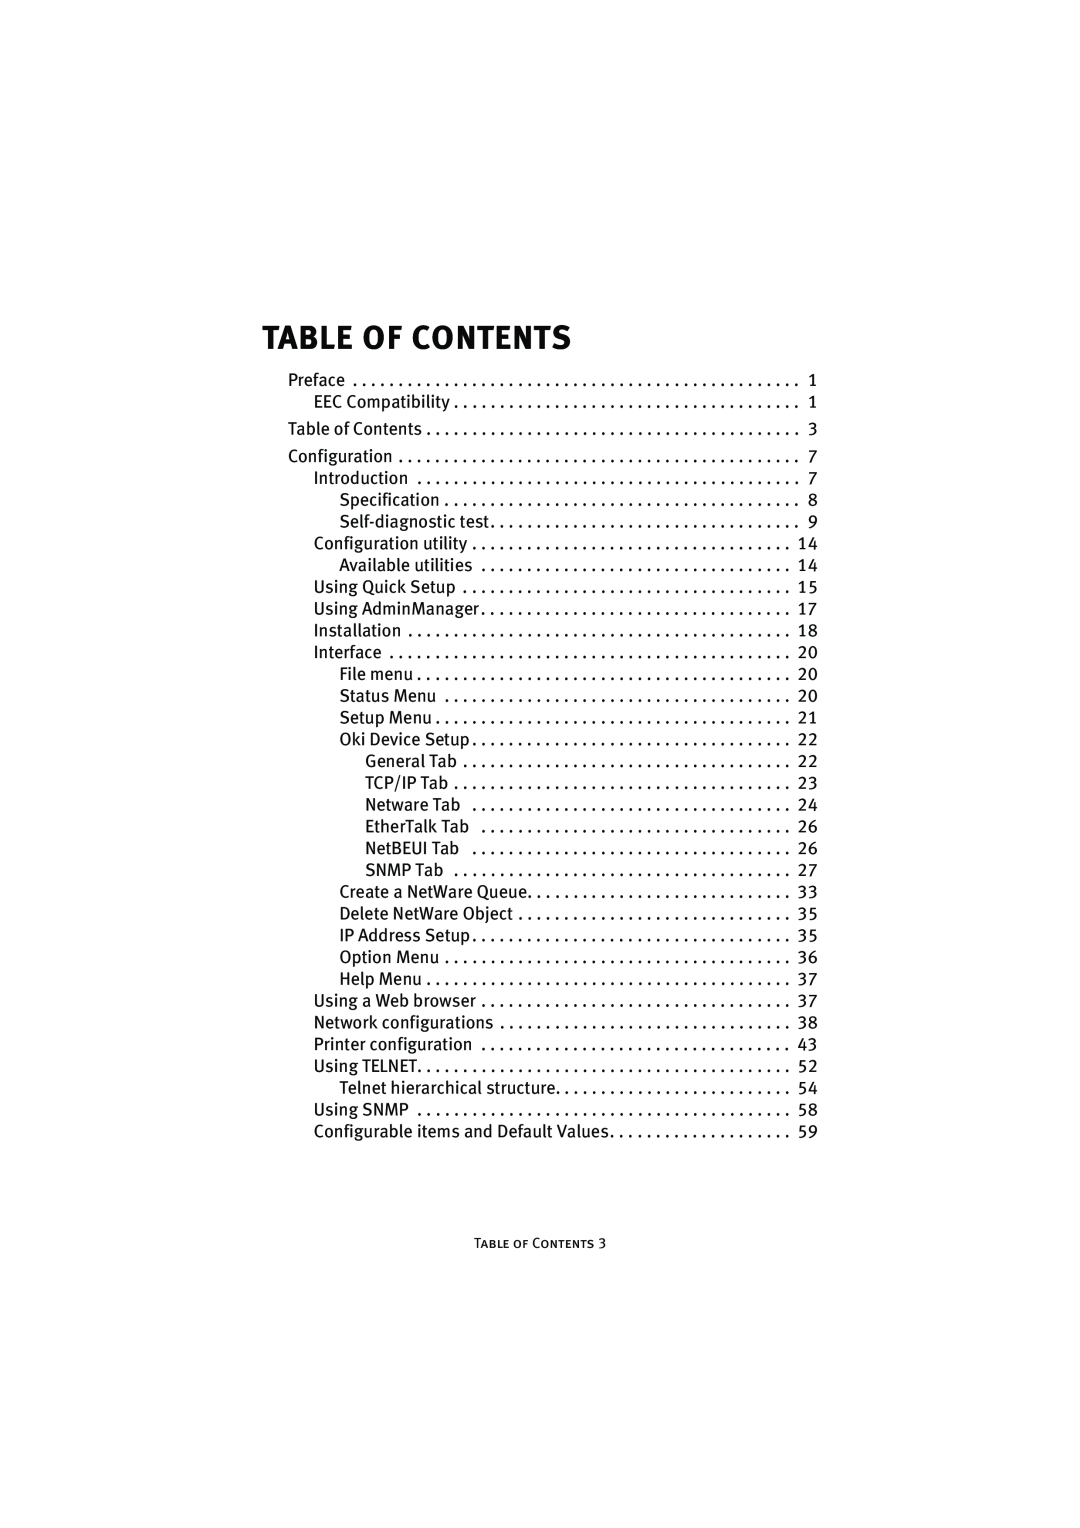 Oki 7300e manual Table Of Contents, Table of Contents 